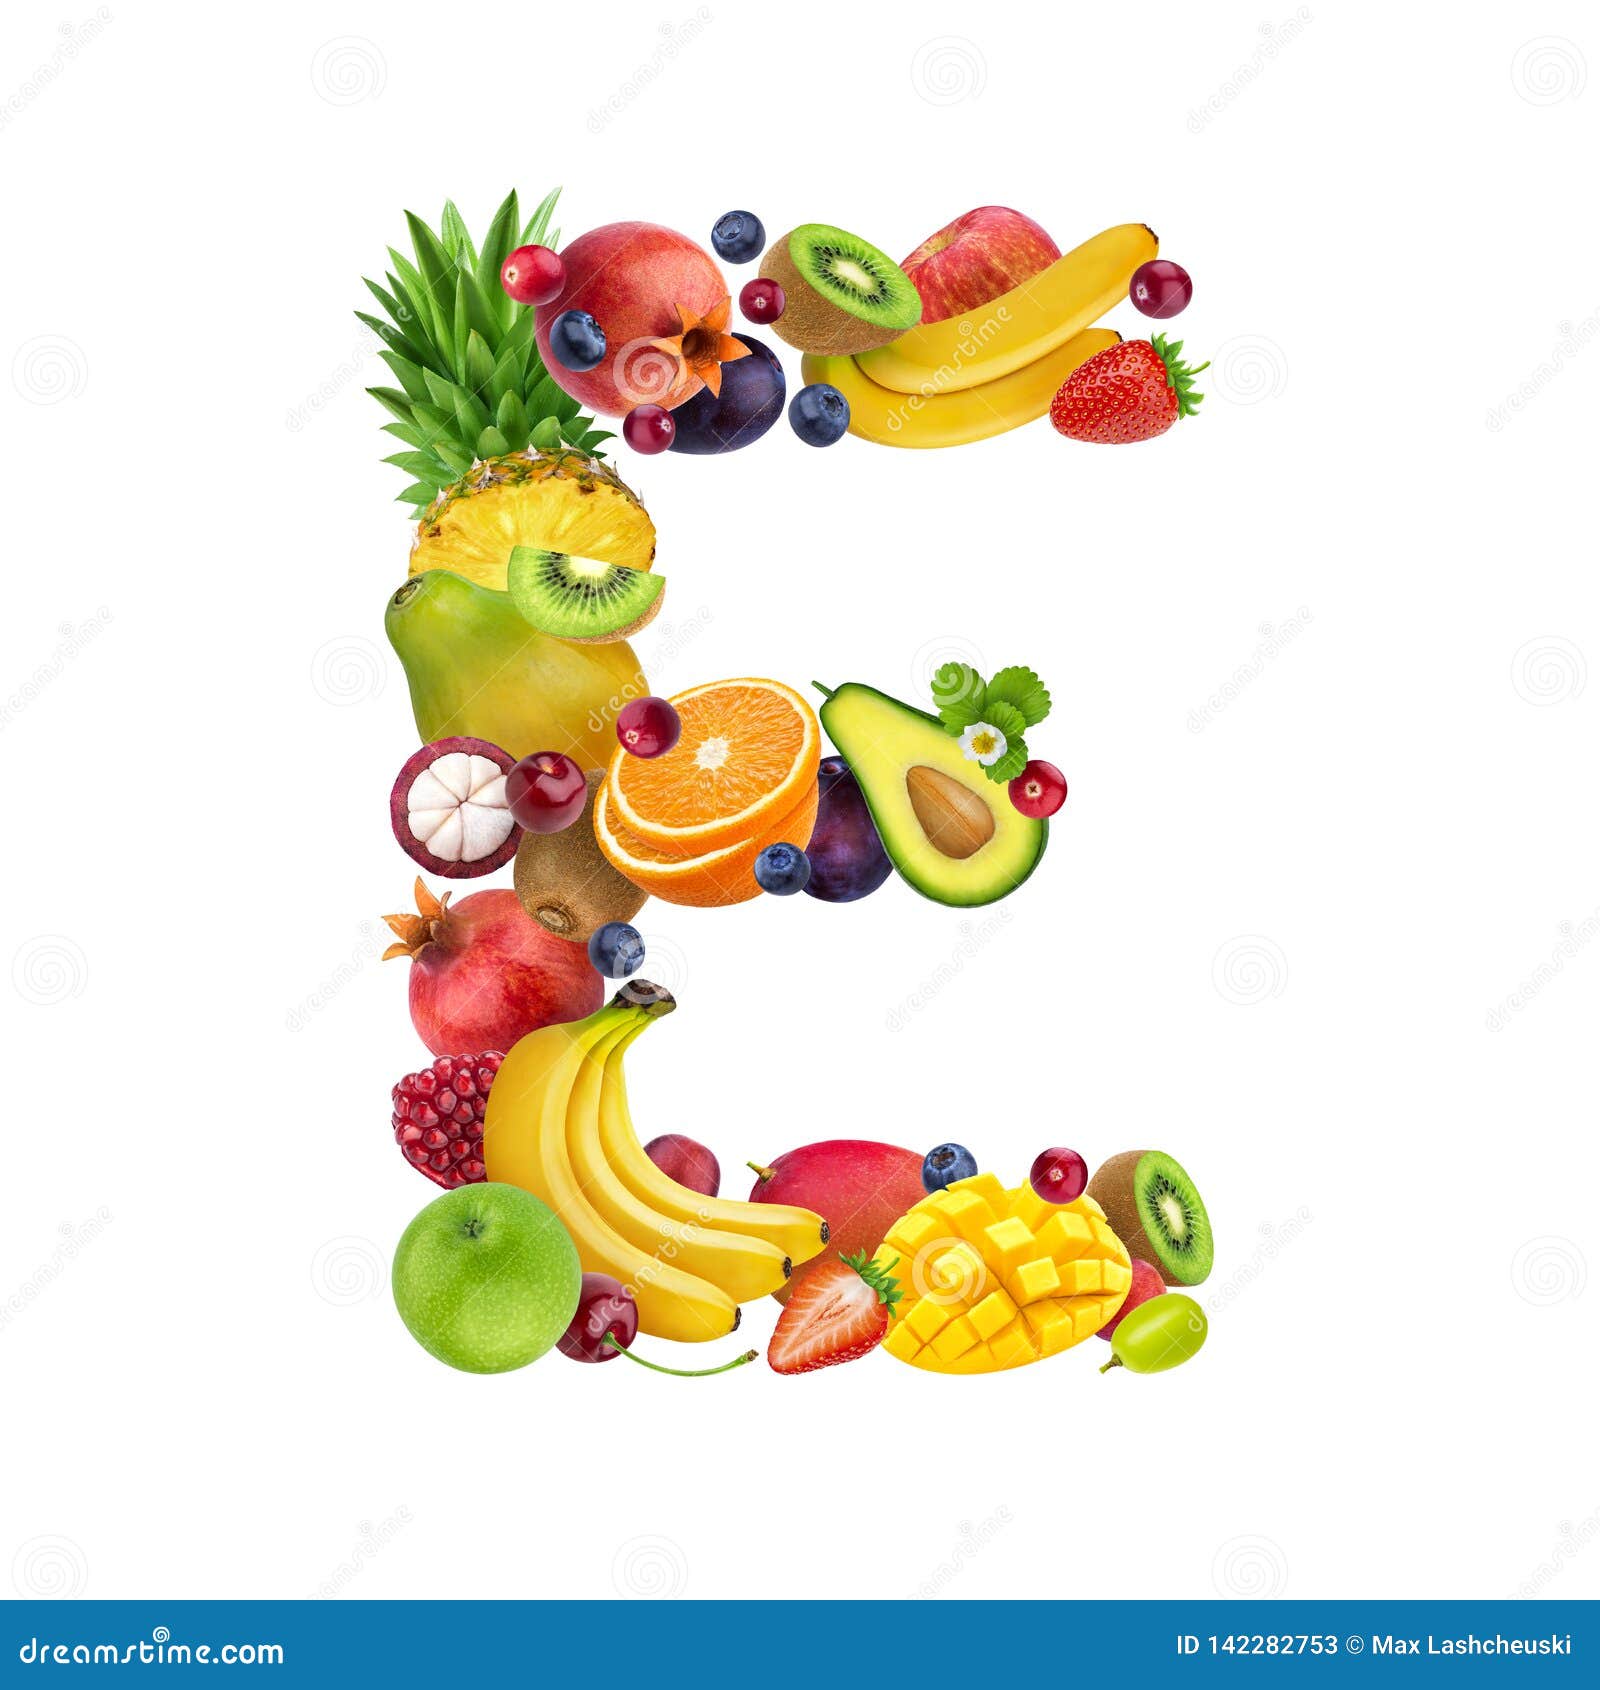 Fruit Qui Commence Par La Lettre E Letter E Made of Different Fruits and Berries, Fruit Font Isolated on